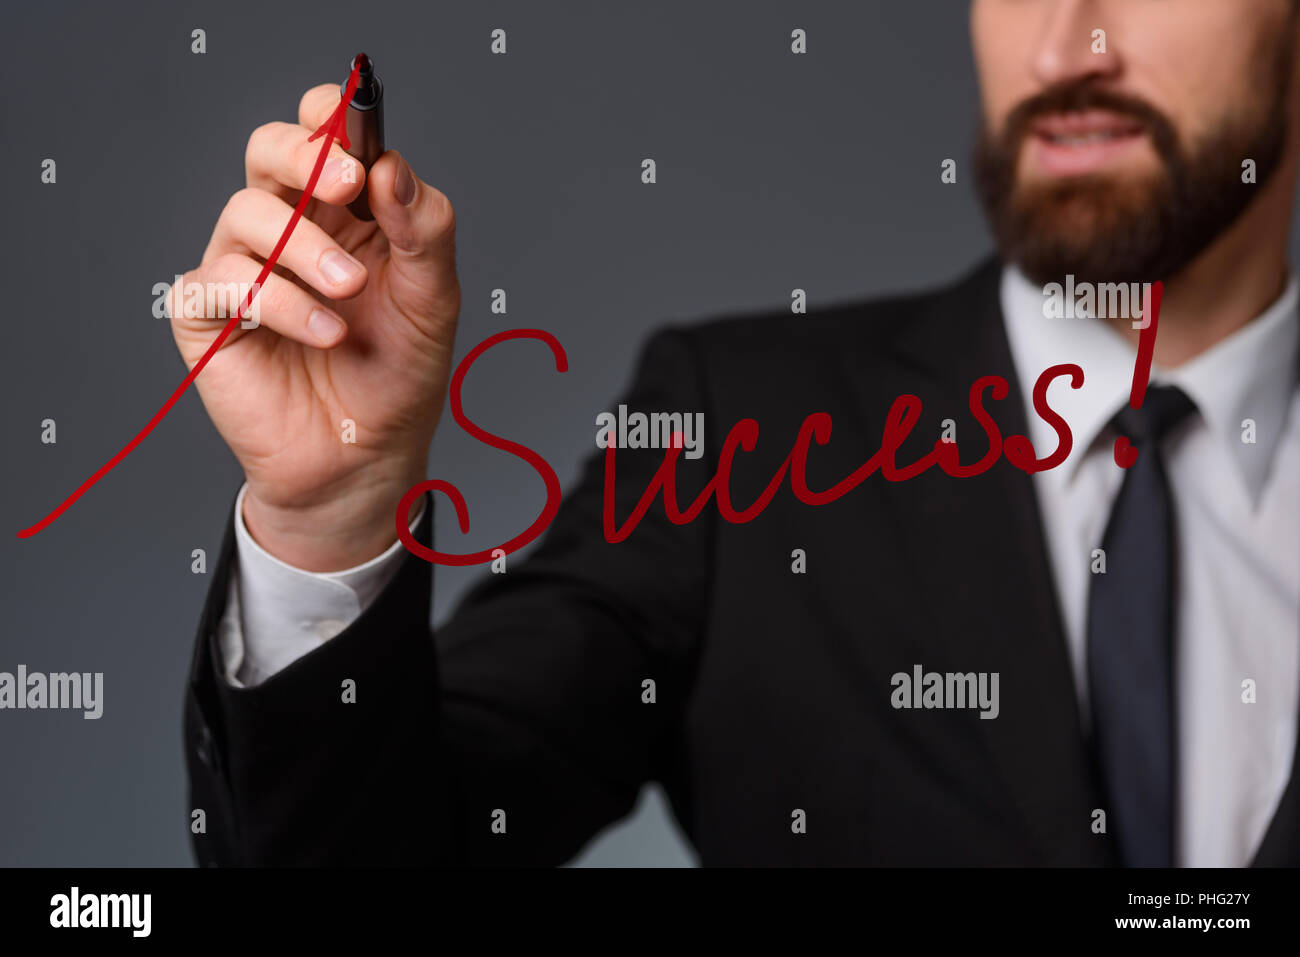 'Success' lettering in the foreground Stock Photo